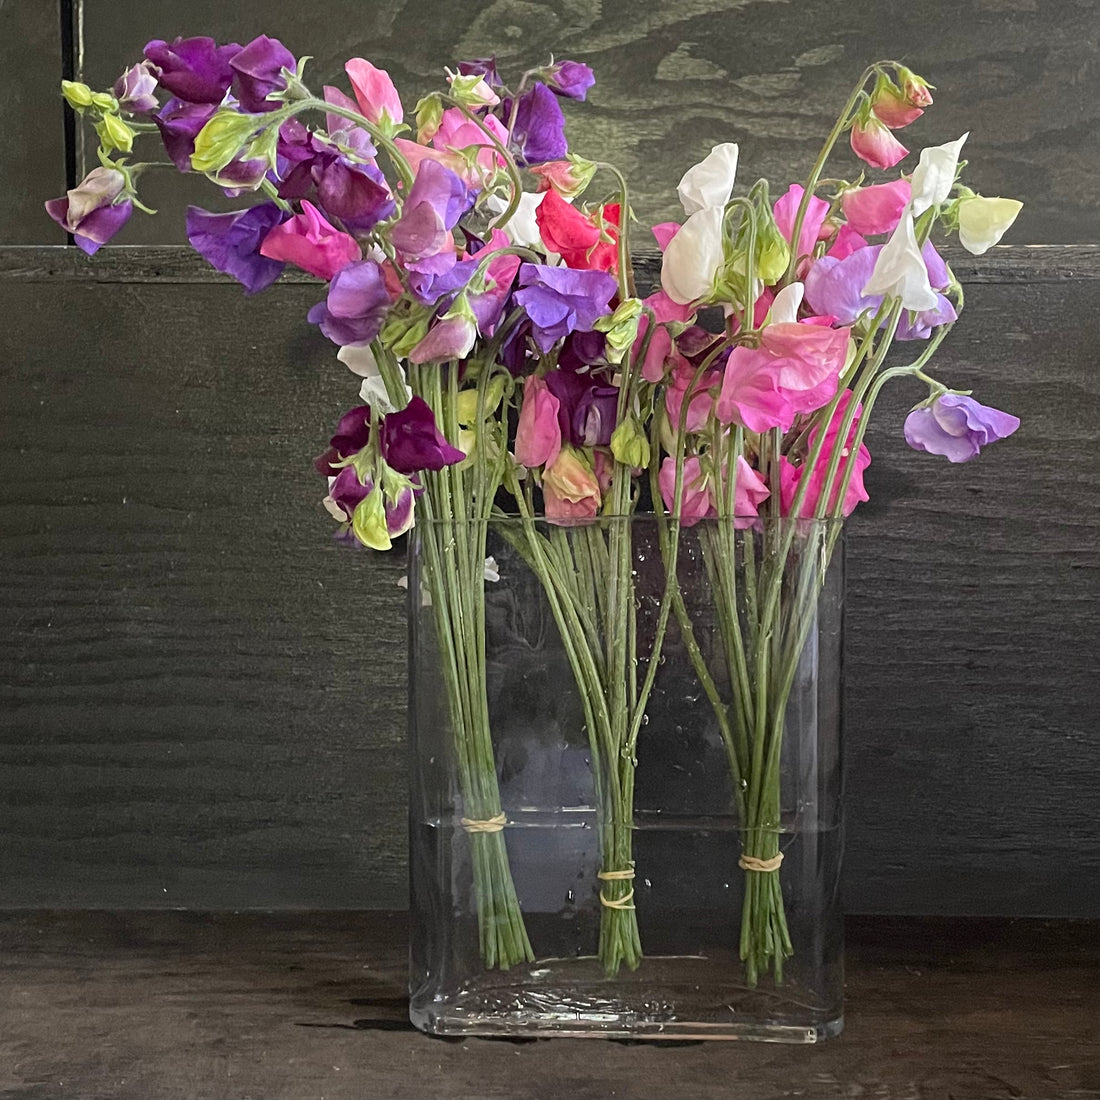 Sweet Peas by the bunch